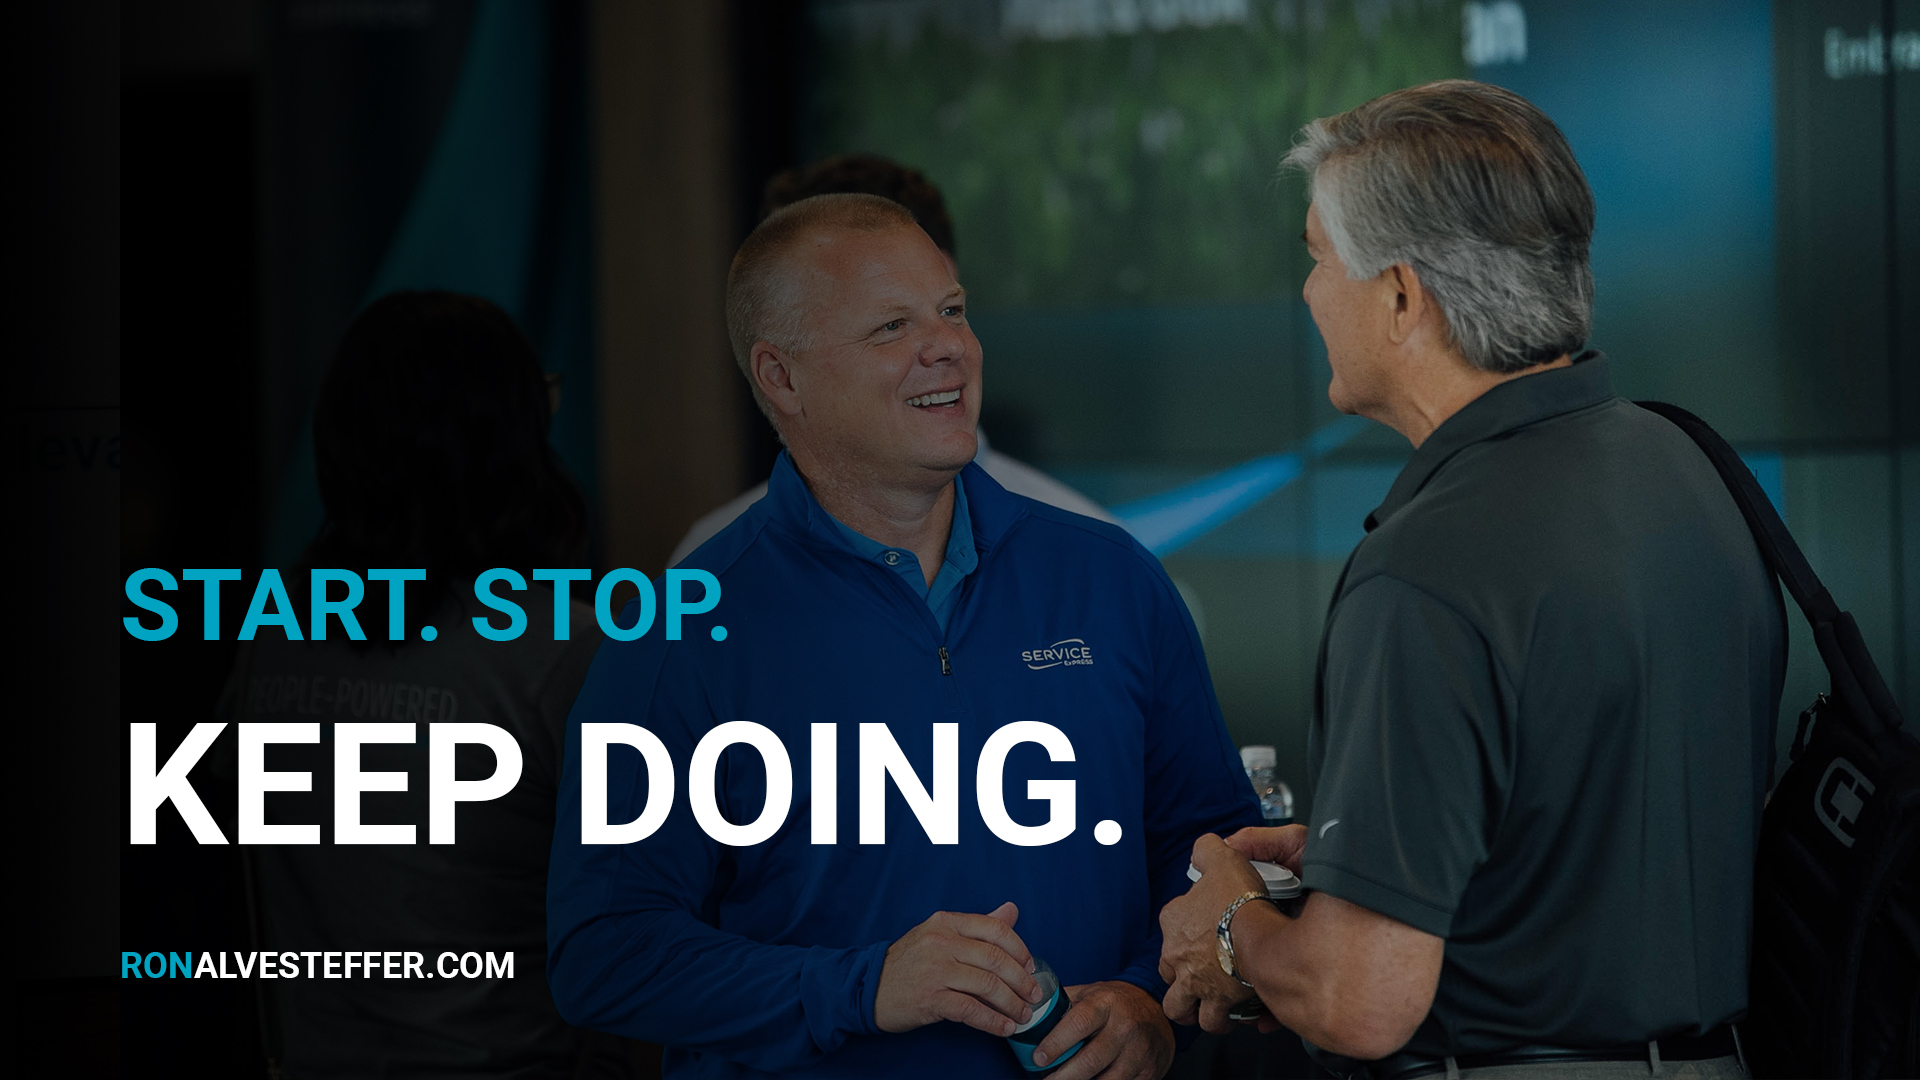 Start. Stop. And Keep Doing.